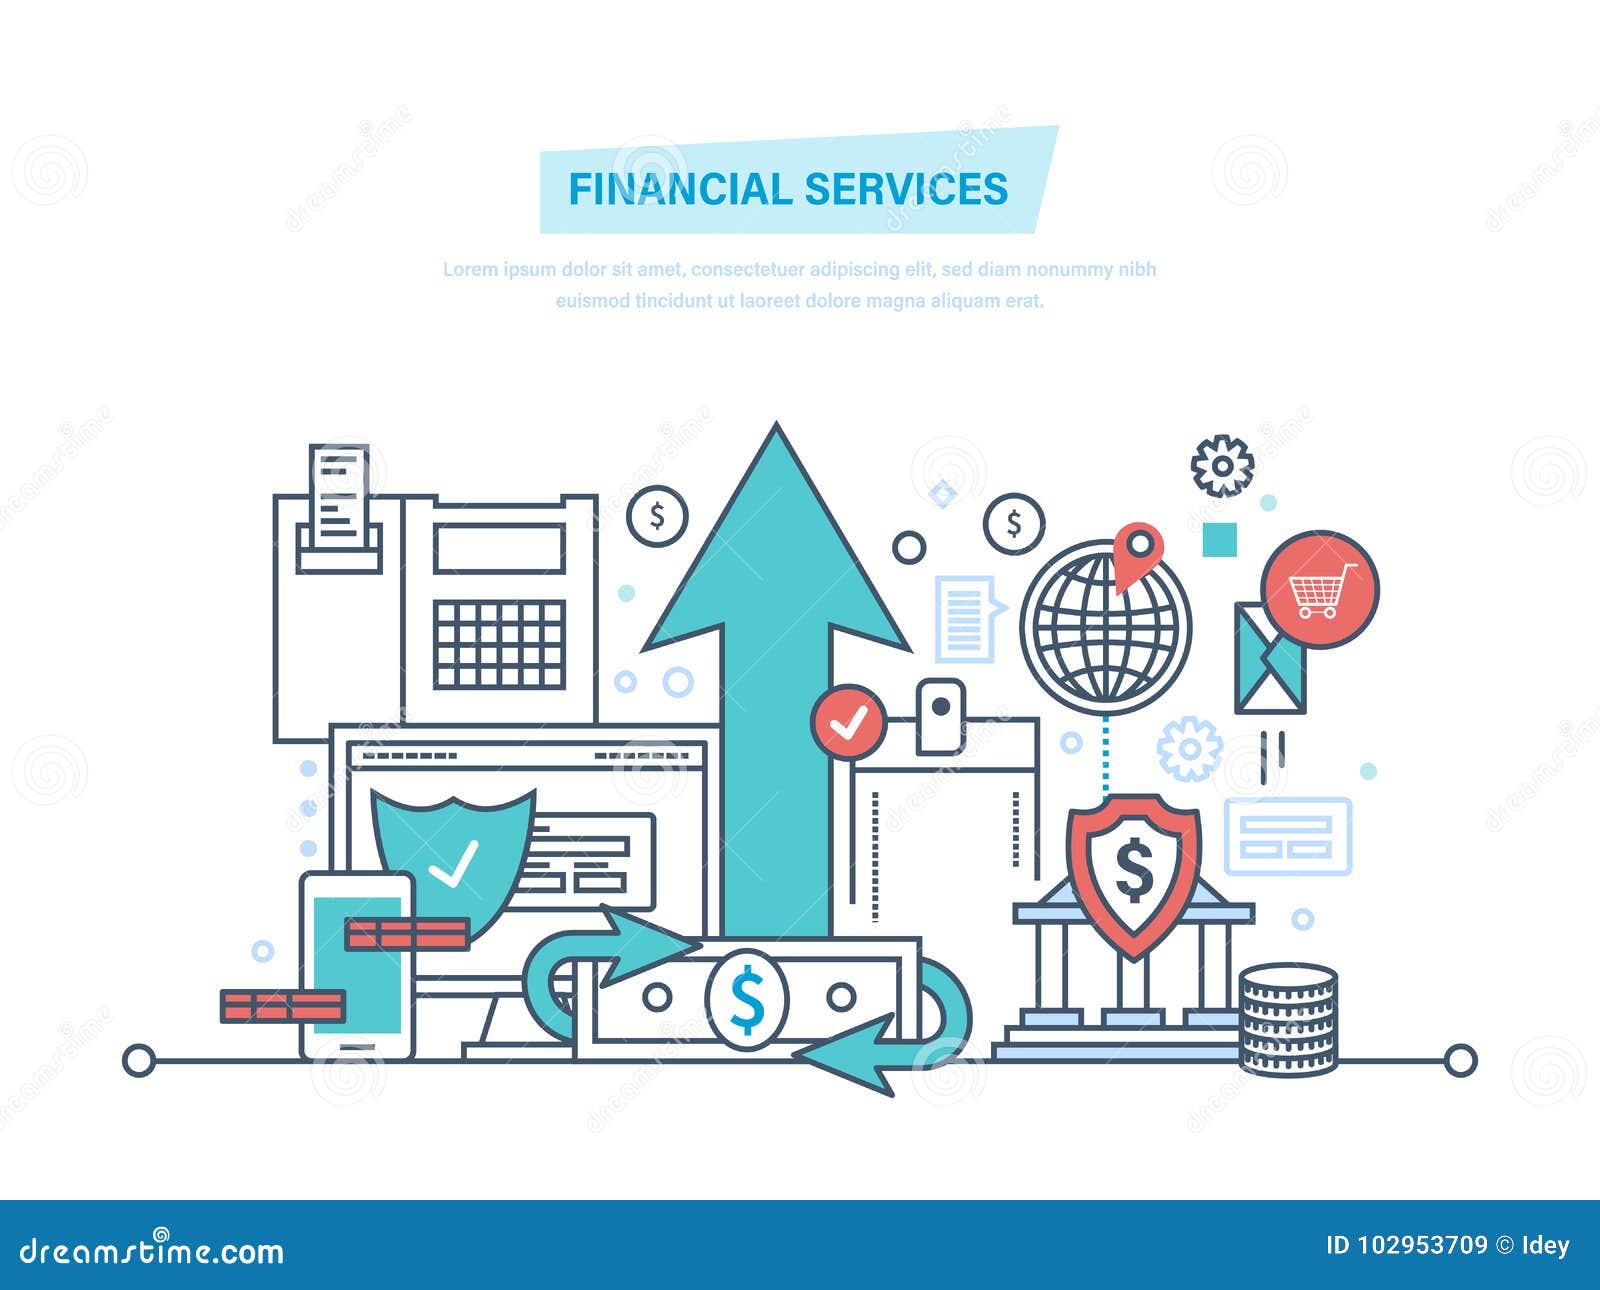 financial services. online banking, protection, payment security, analysis deposits, investment.